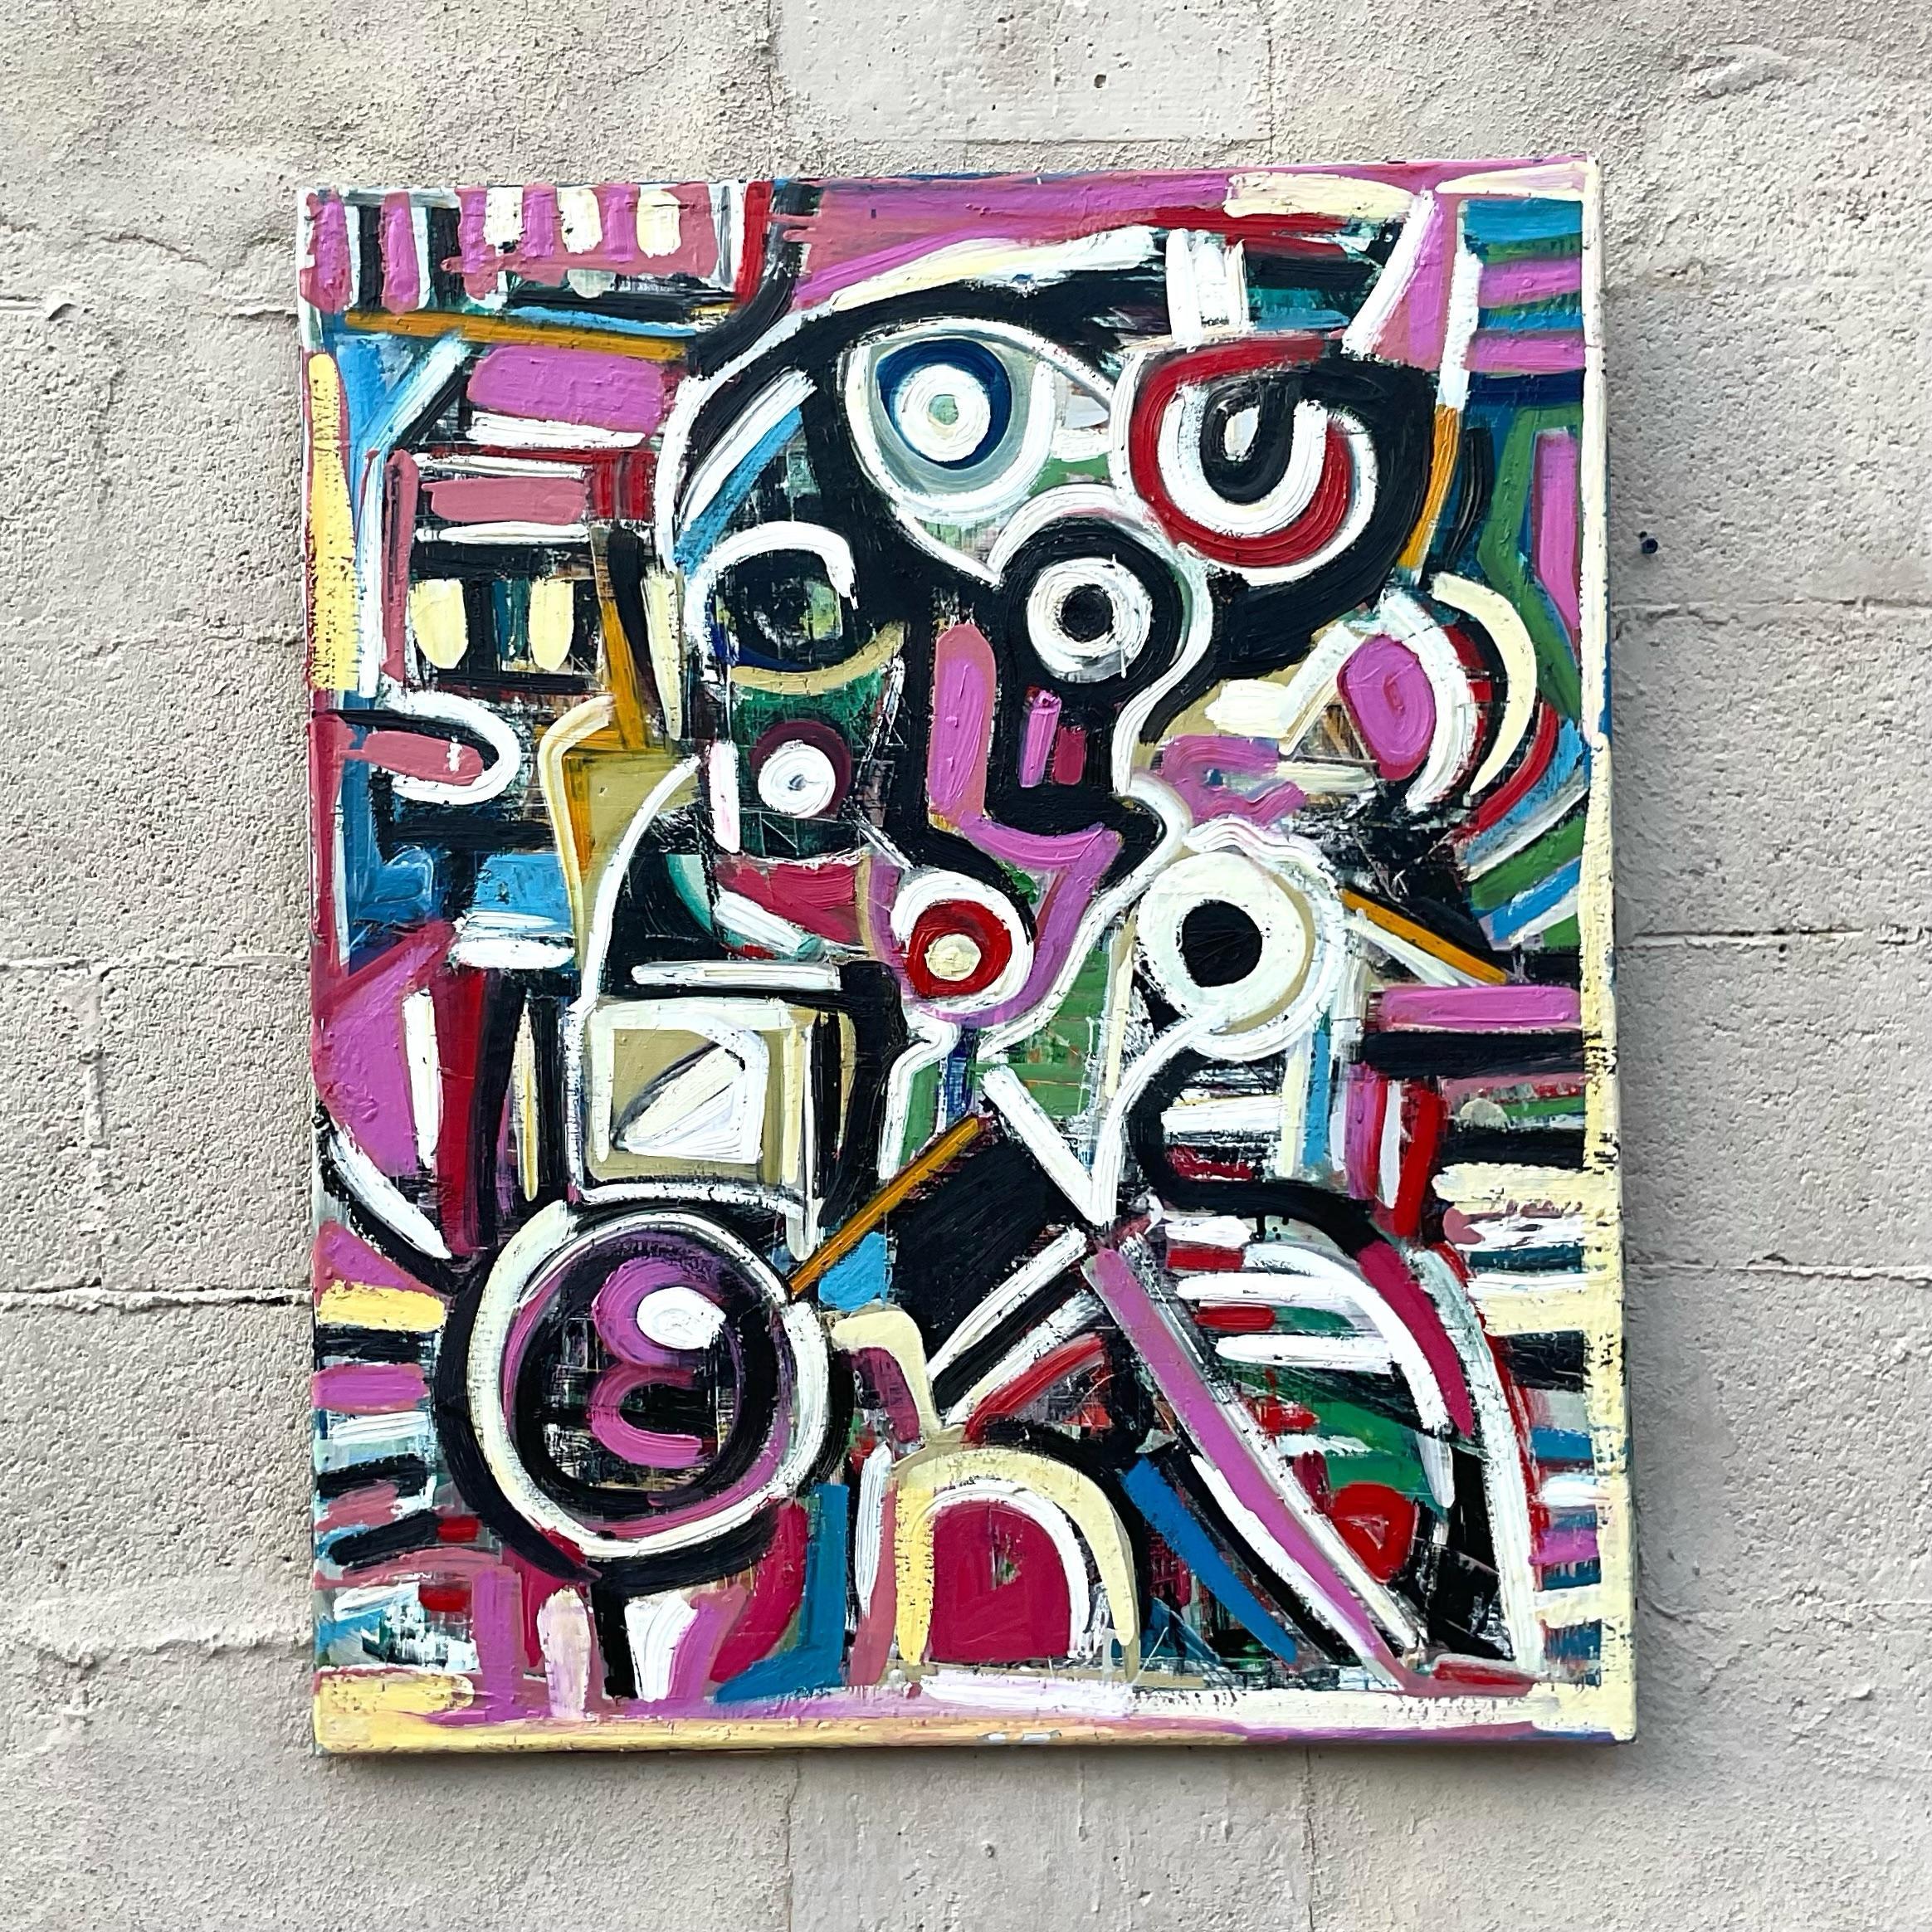 Vintage Terry J Frid oil on canvas fabulous vibrantly placed abstract geometric shapes. Frid is known for his vibrancy and ability to capture movement with an element sophistication not often found in abstract art. Other pieces by this artist and